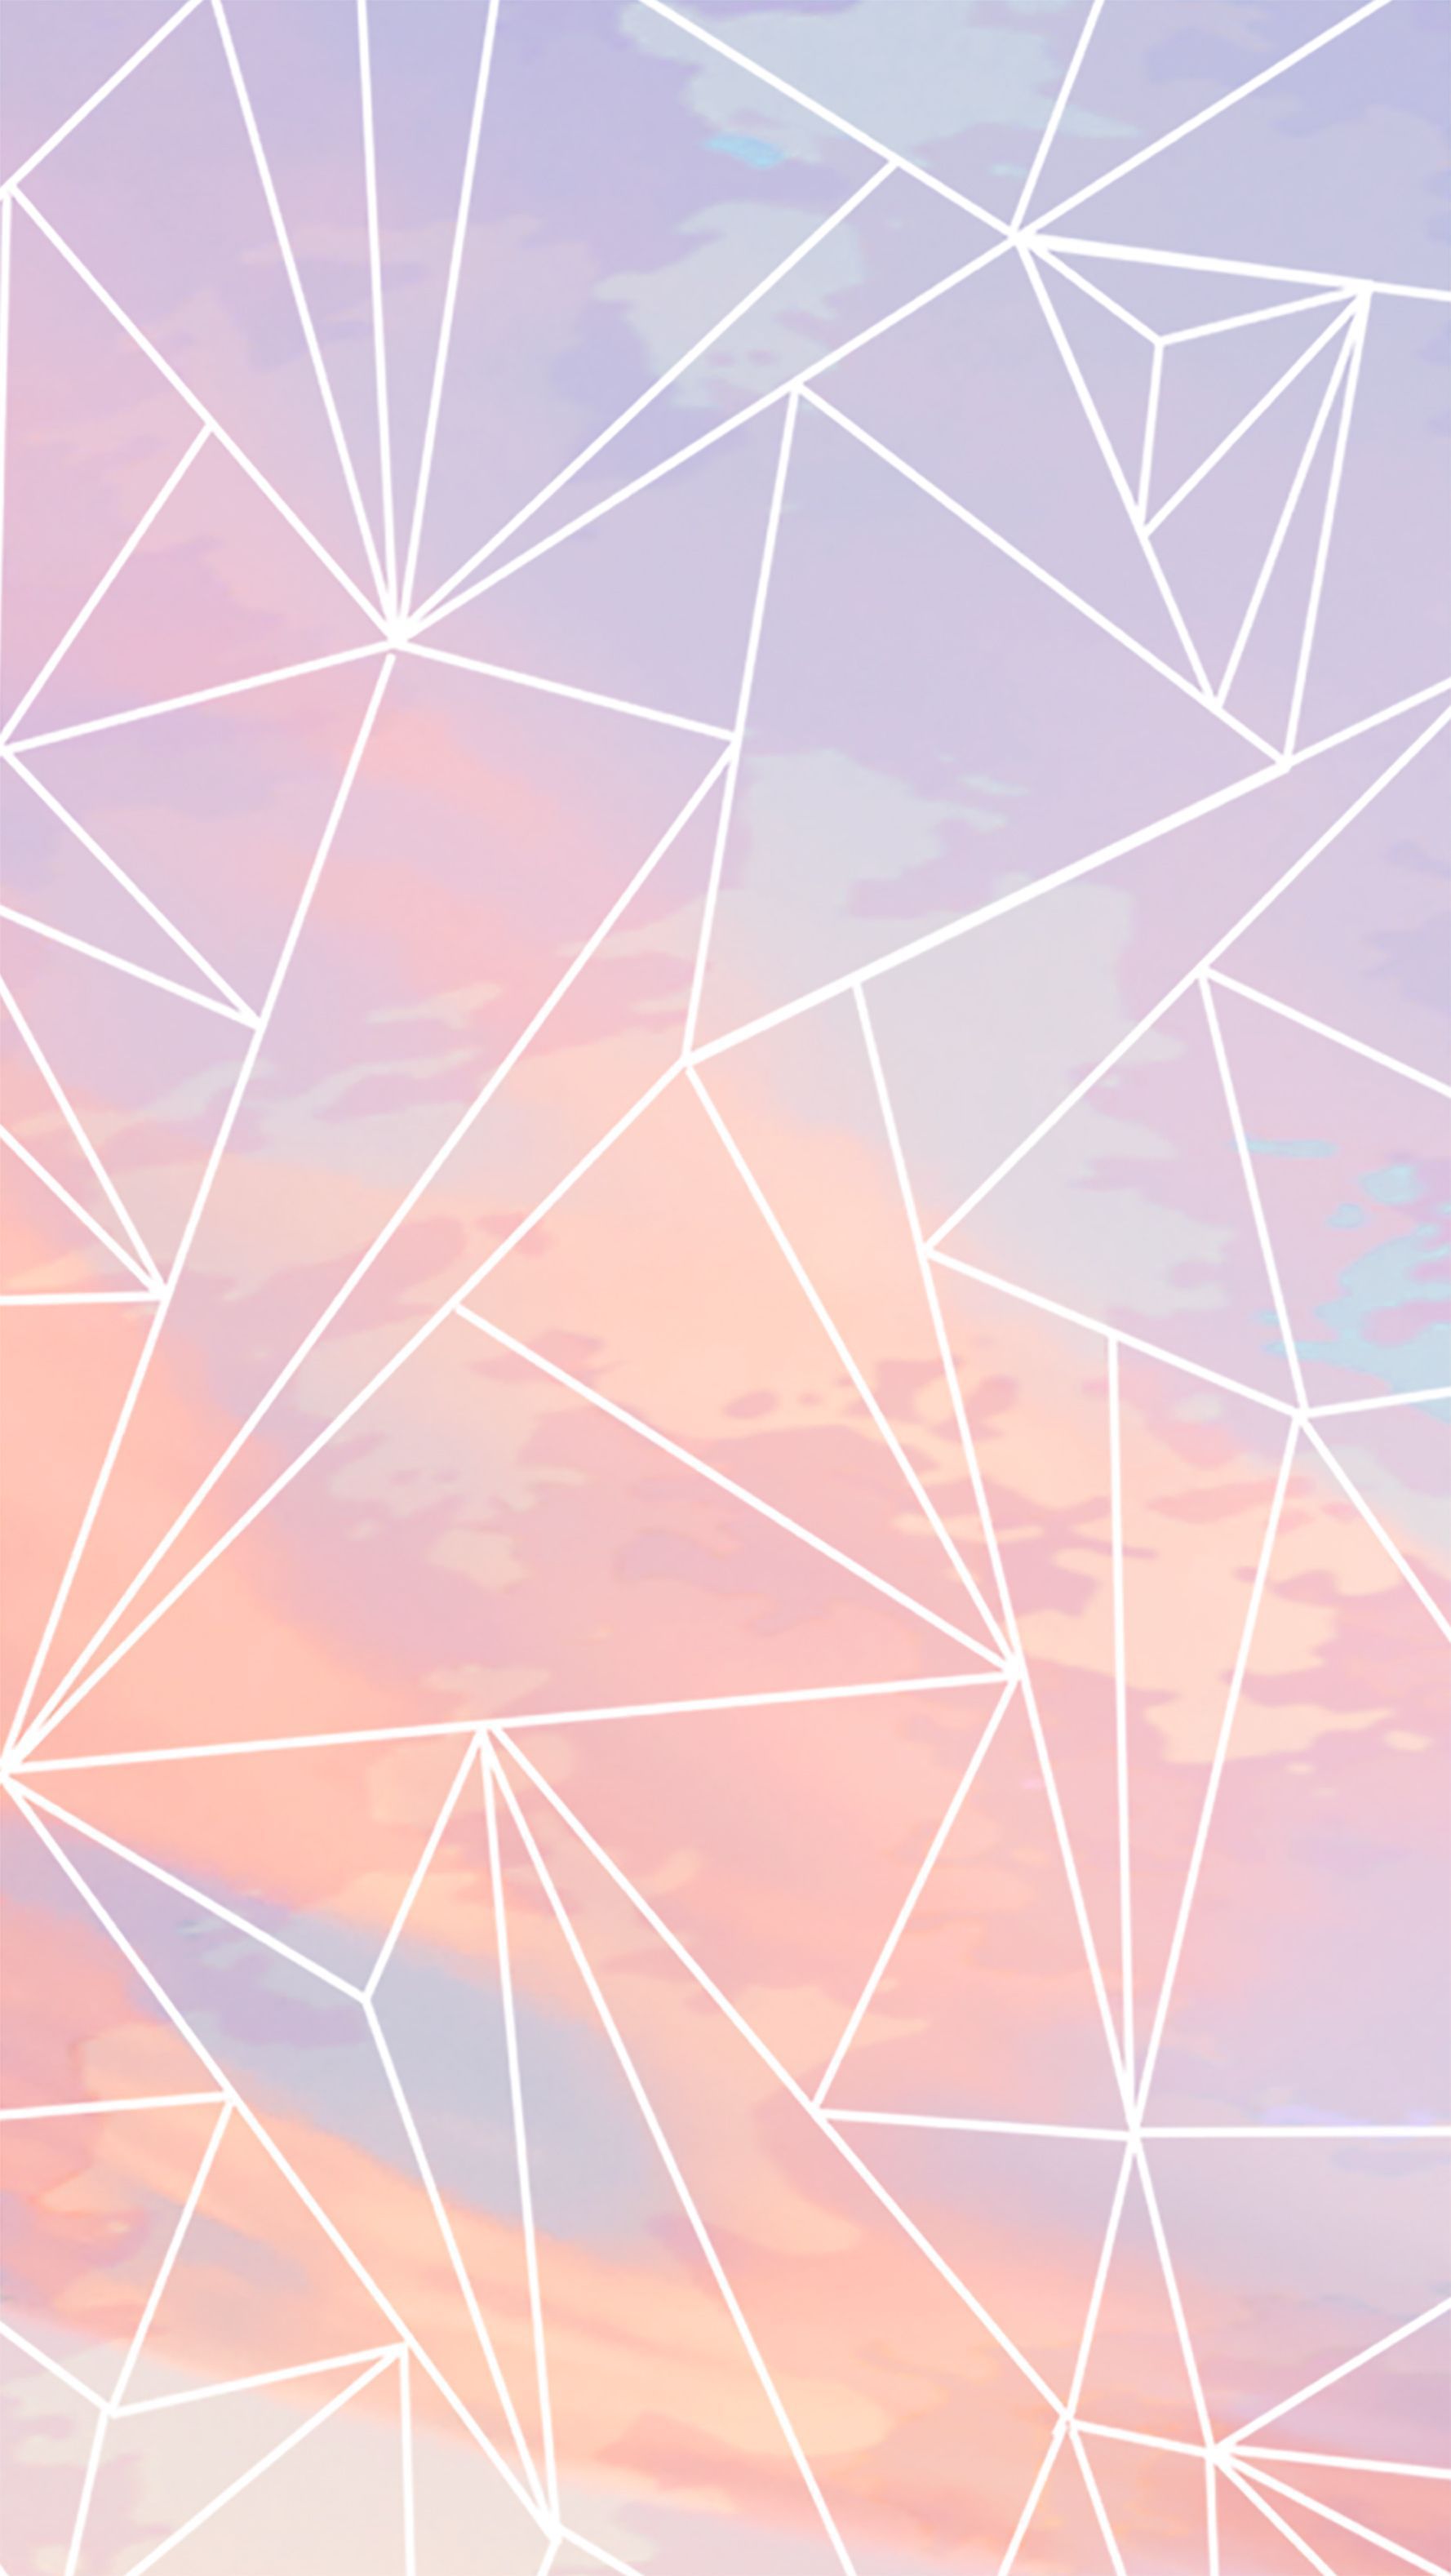 A pink and purple sky with geometric shapes - Design, geometry